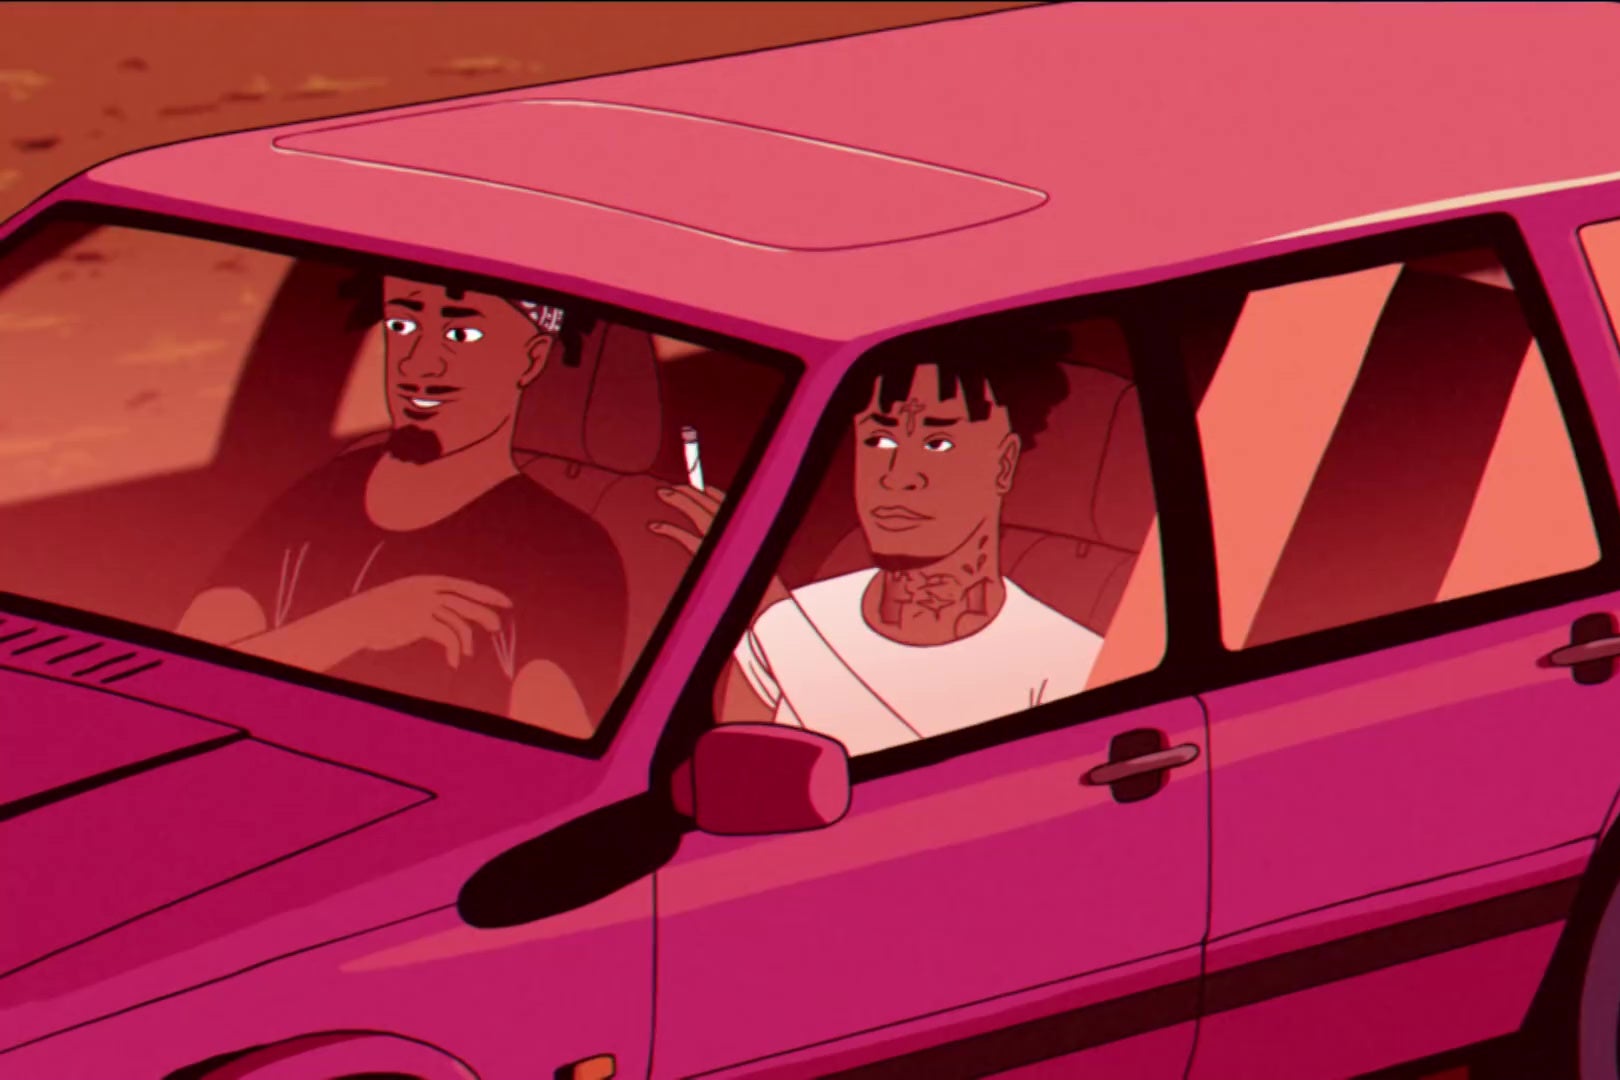 Animated versions of Metro Boomin and 21 Savage, sitting in a car, passing a joint.